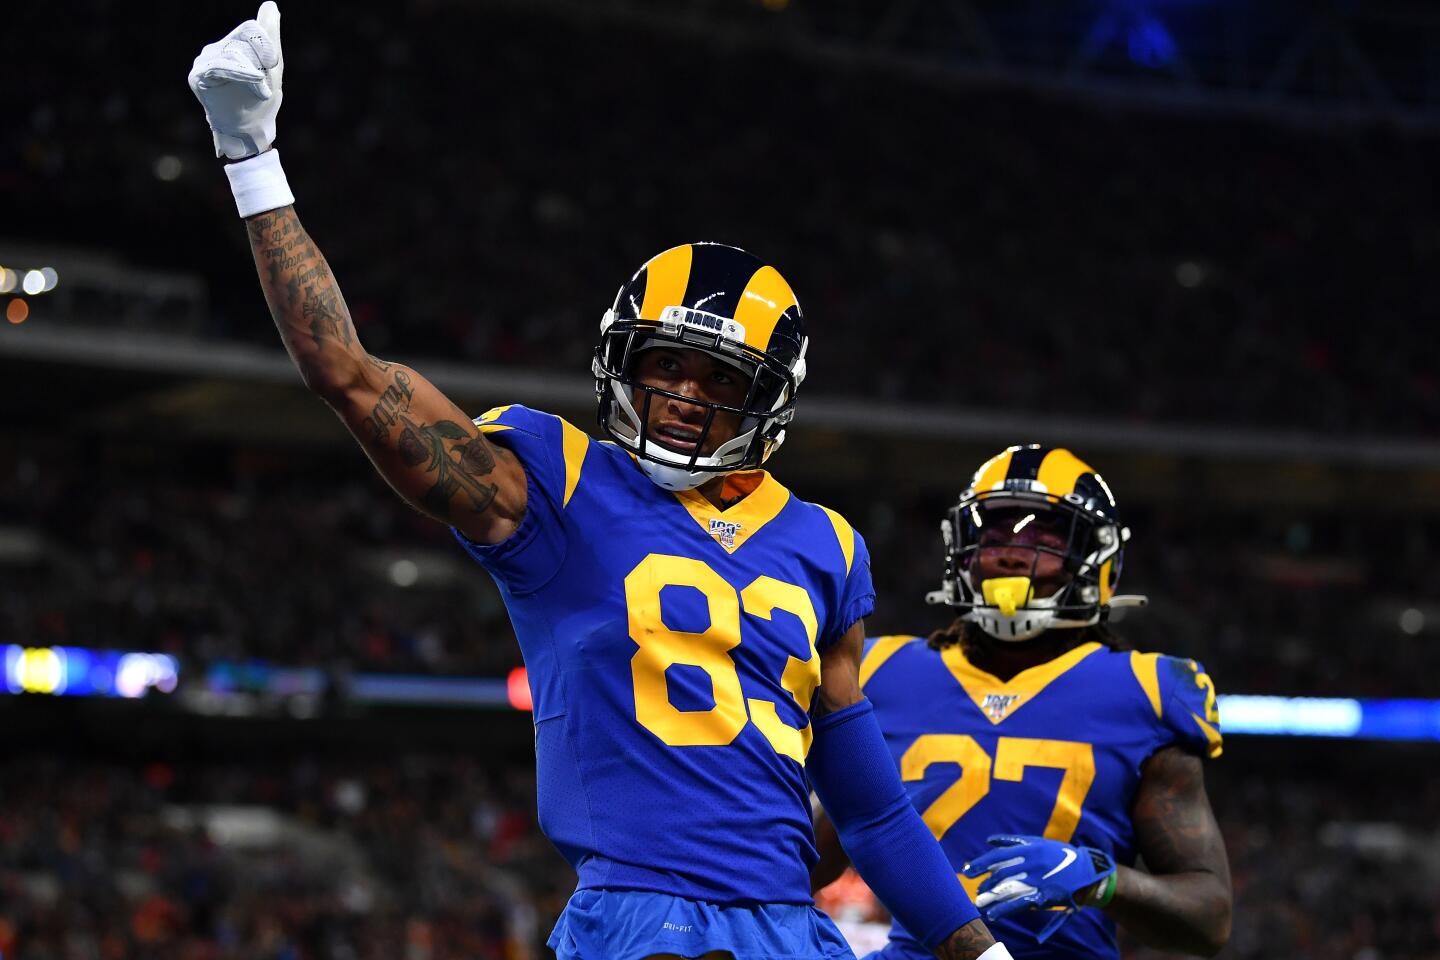 Rams receiver Josh Reynolds celebrates after scoring a touch down against the Bengals.